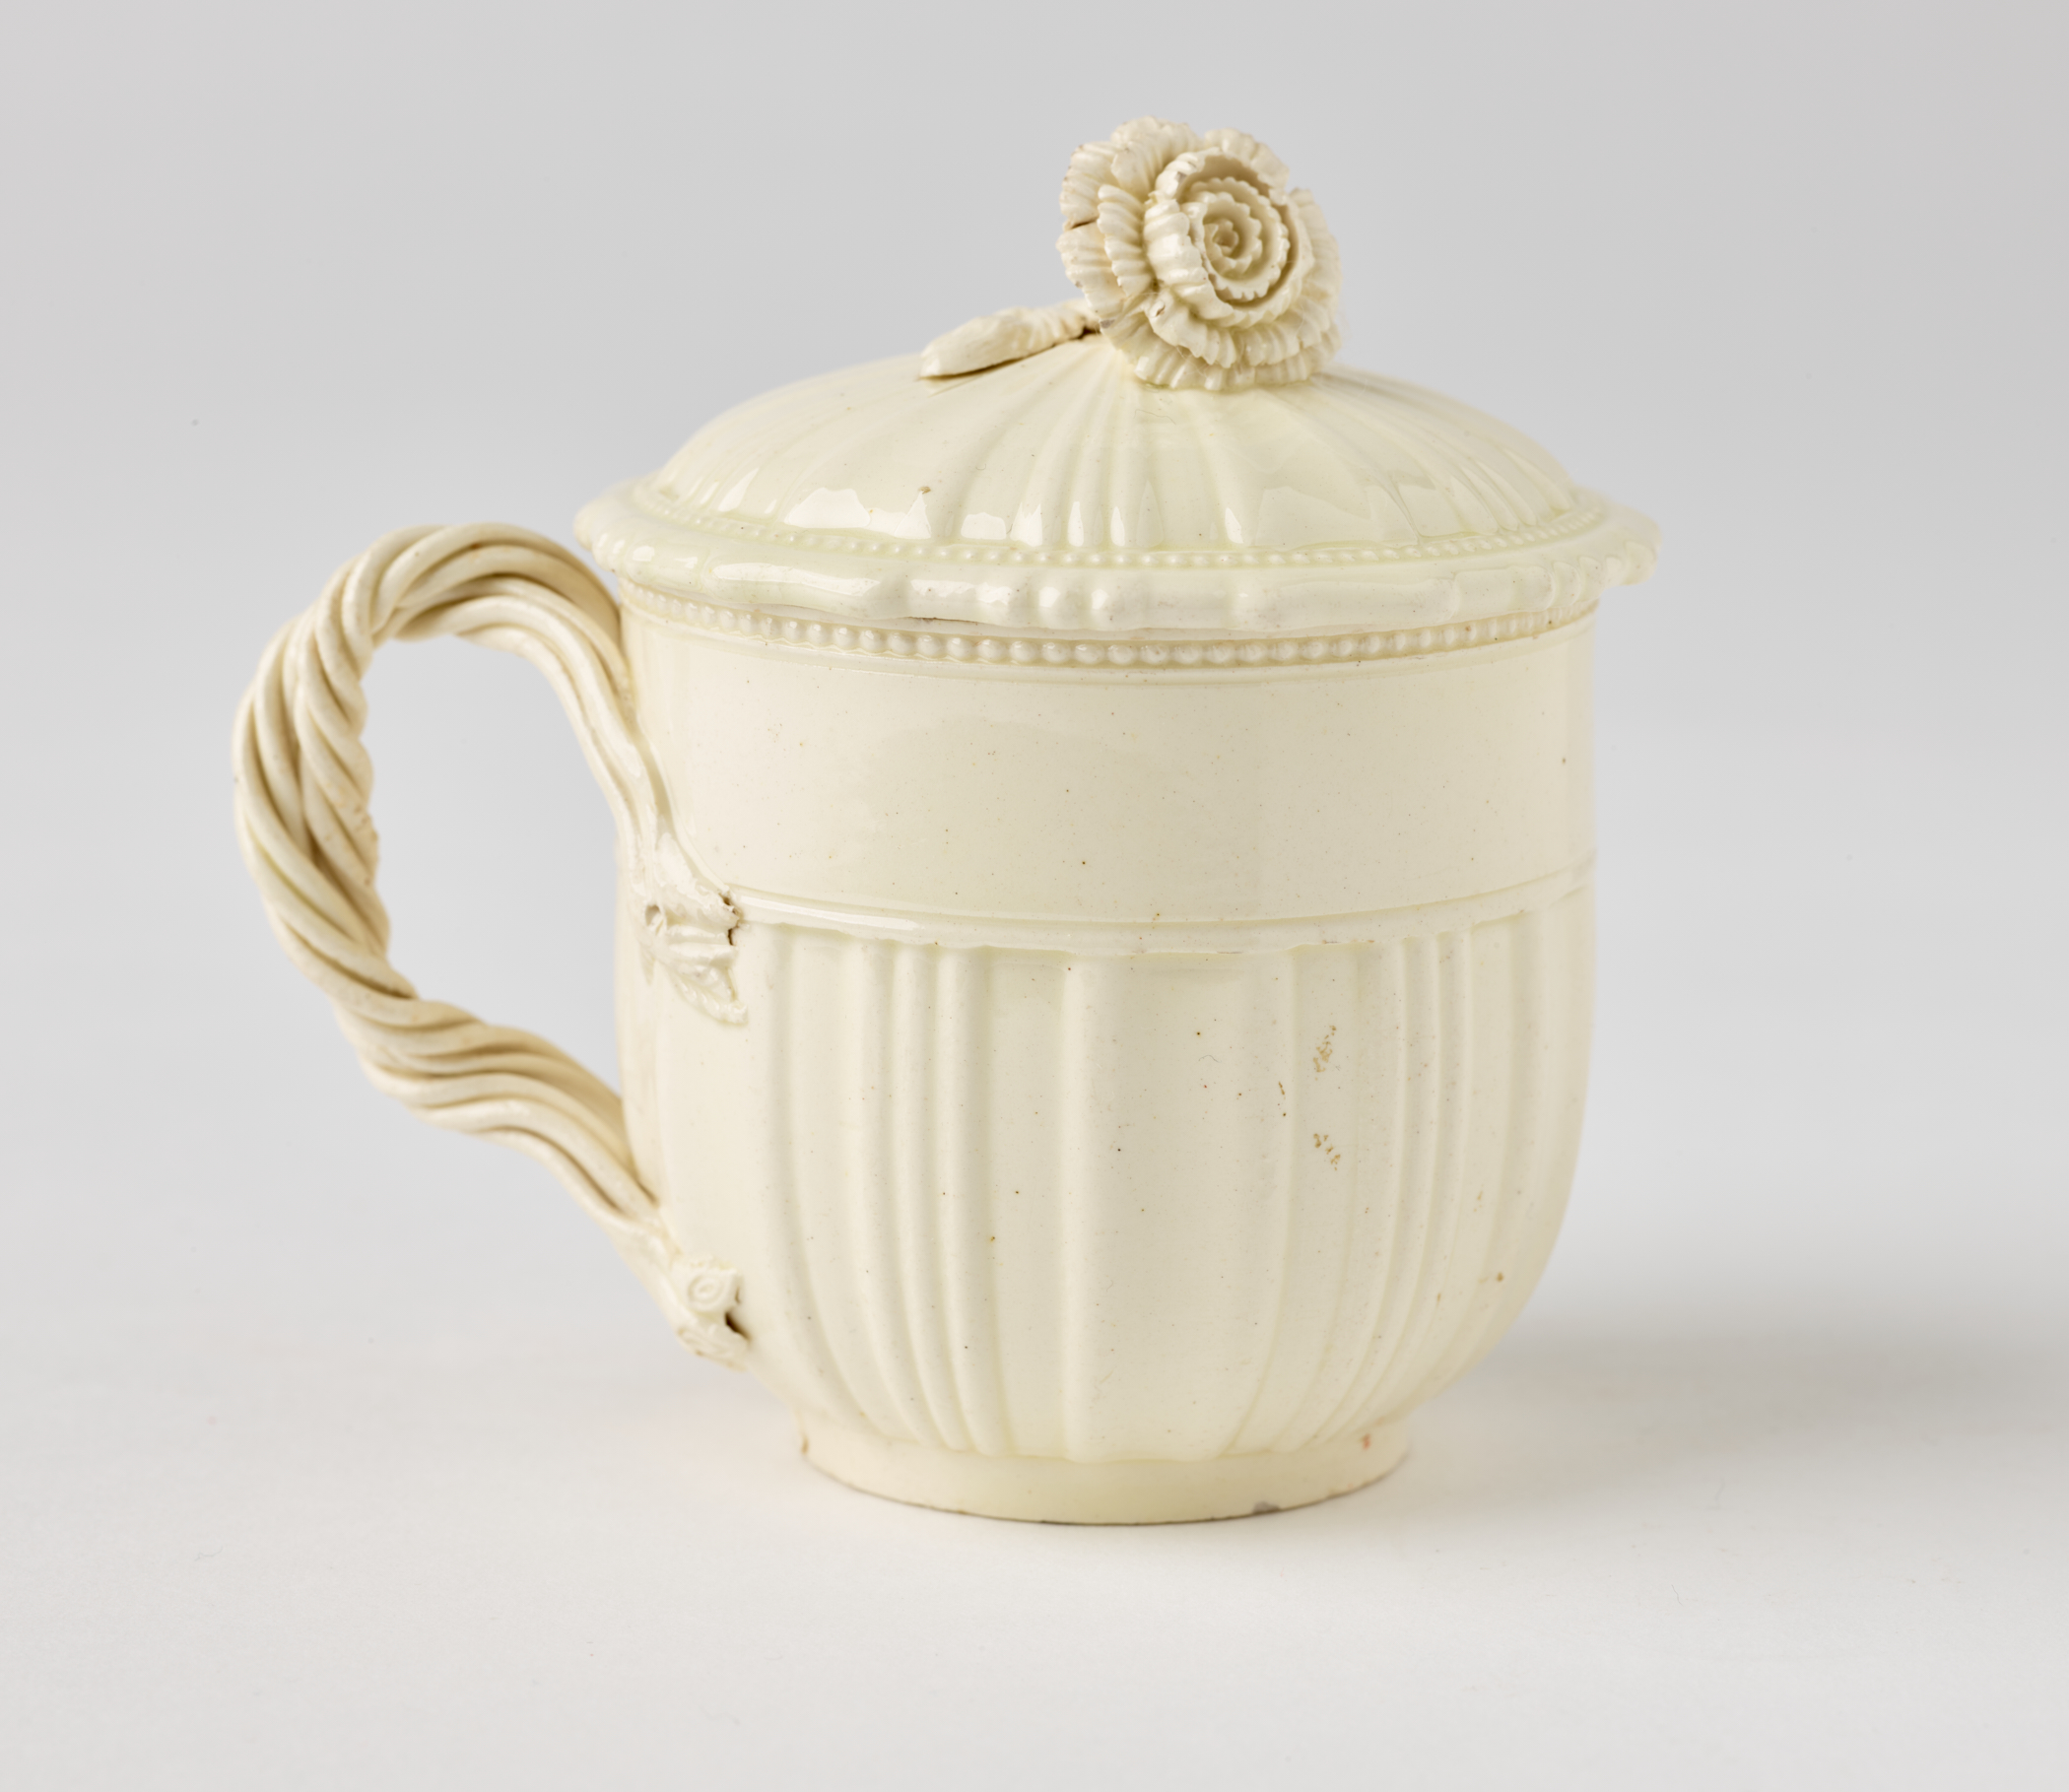 /A%20white%20creamware%20custard%20cup%2C%20with%20a%20sculptural%20swirled%20handle%2C%20and%20lid%20with%20sculpted%20finial.